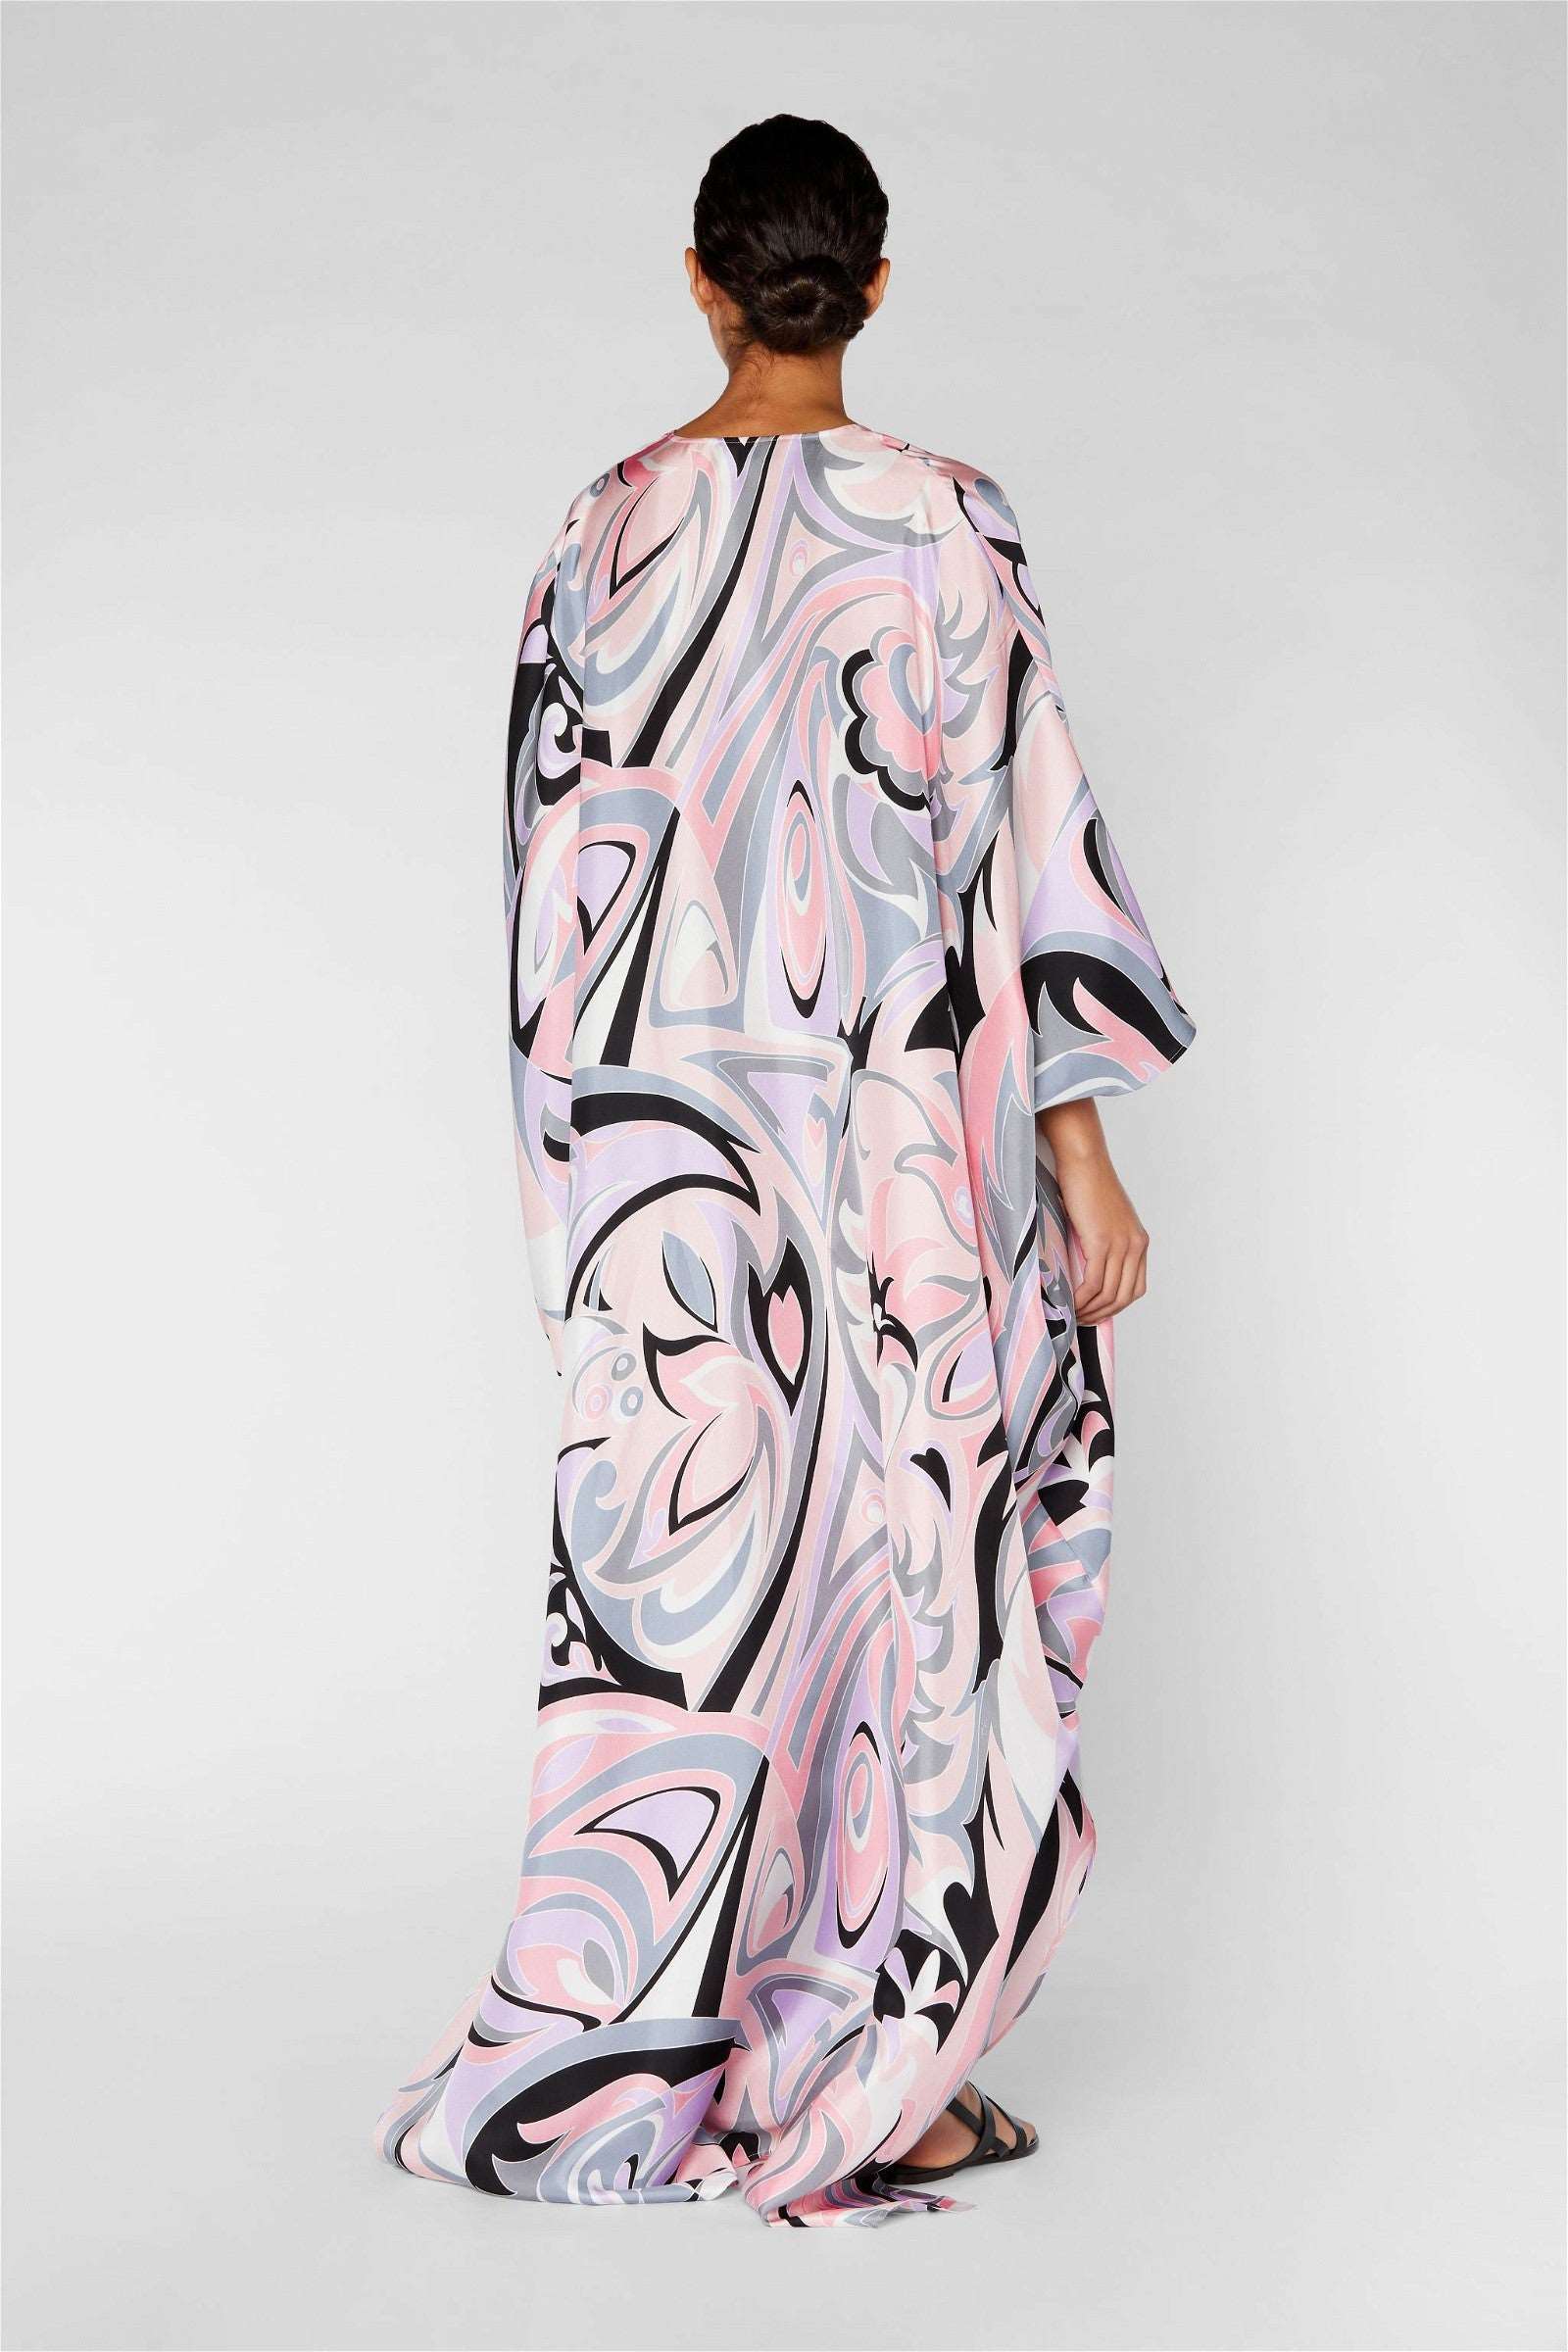 The model in the image is wearing Pink Colour Printed Satin Silk Party Wear Kaftan from Alice Milan. Crafted with the finest materials and impeccable attention to detail, the Kaftan / Dress looks premium, trendy, luxurious and offers unparalleled comfort. It’s a perfect clothing option for loungewear, resort wear, party wear or for an airport look. The woman in the image looks happy, and confident with her style statement putting a happy smile on her face.